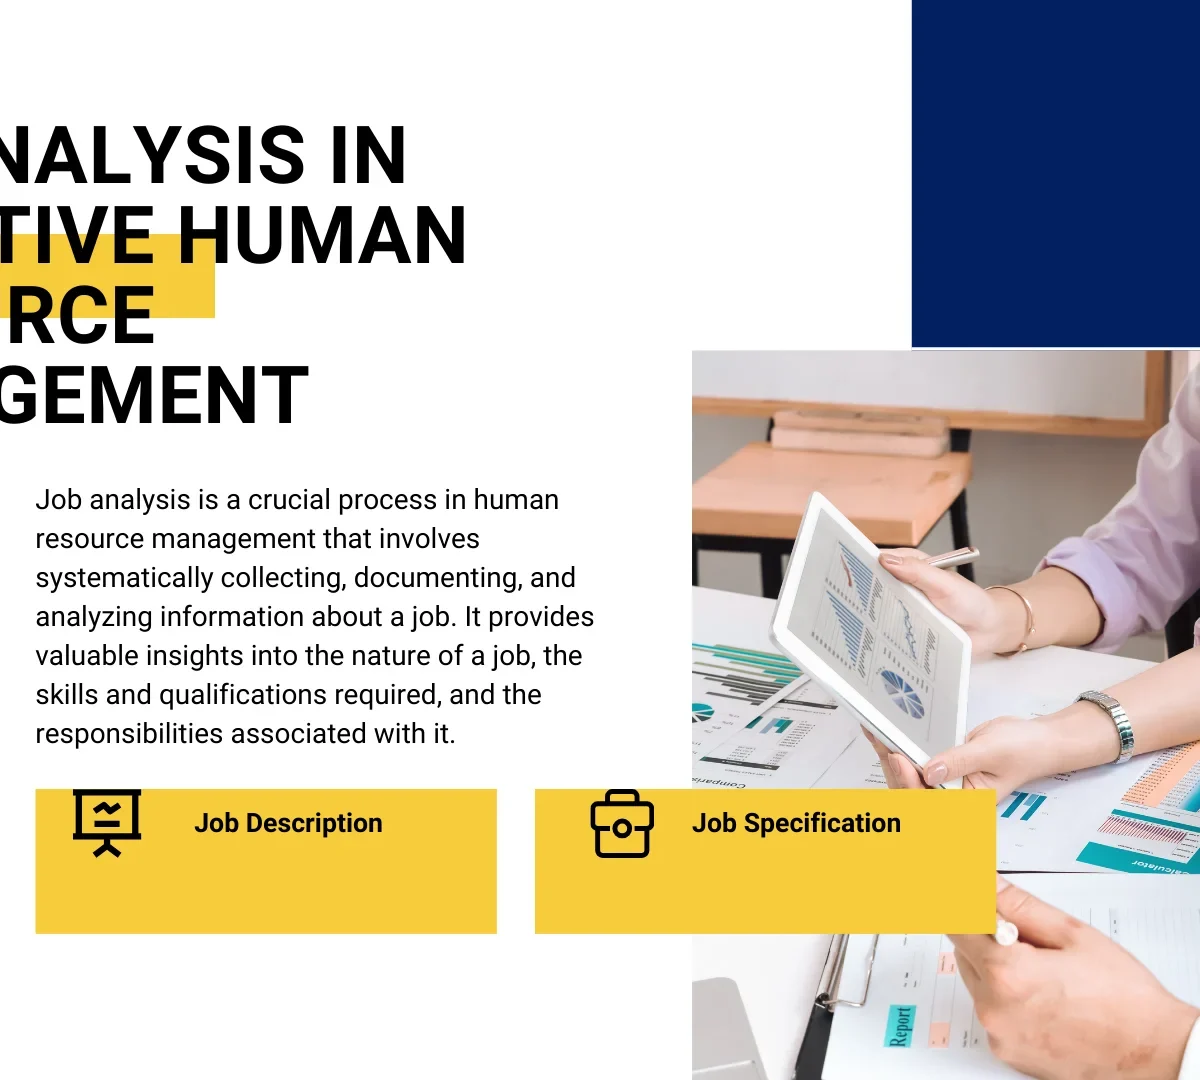 Understanding the Importance of Job Analysis in Effective Human Resource Management